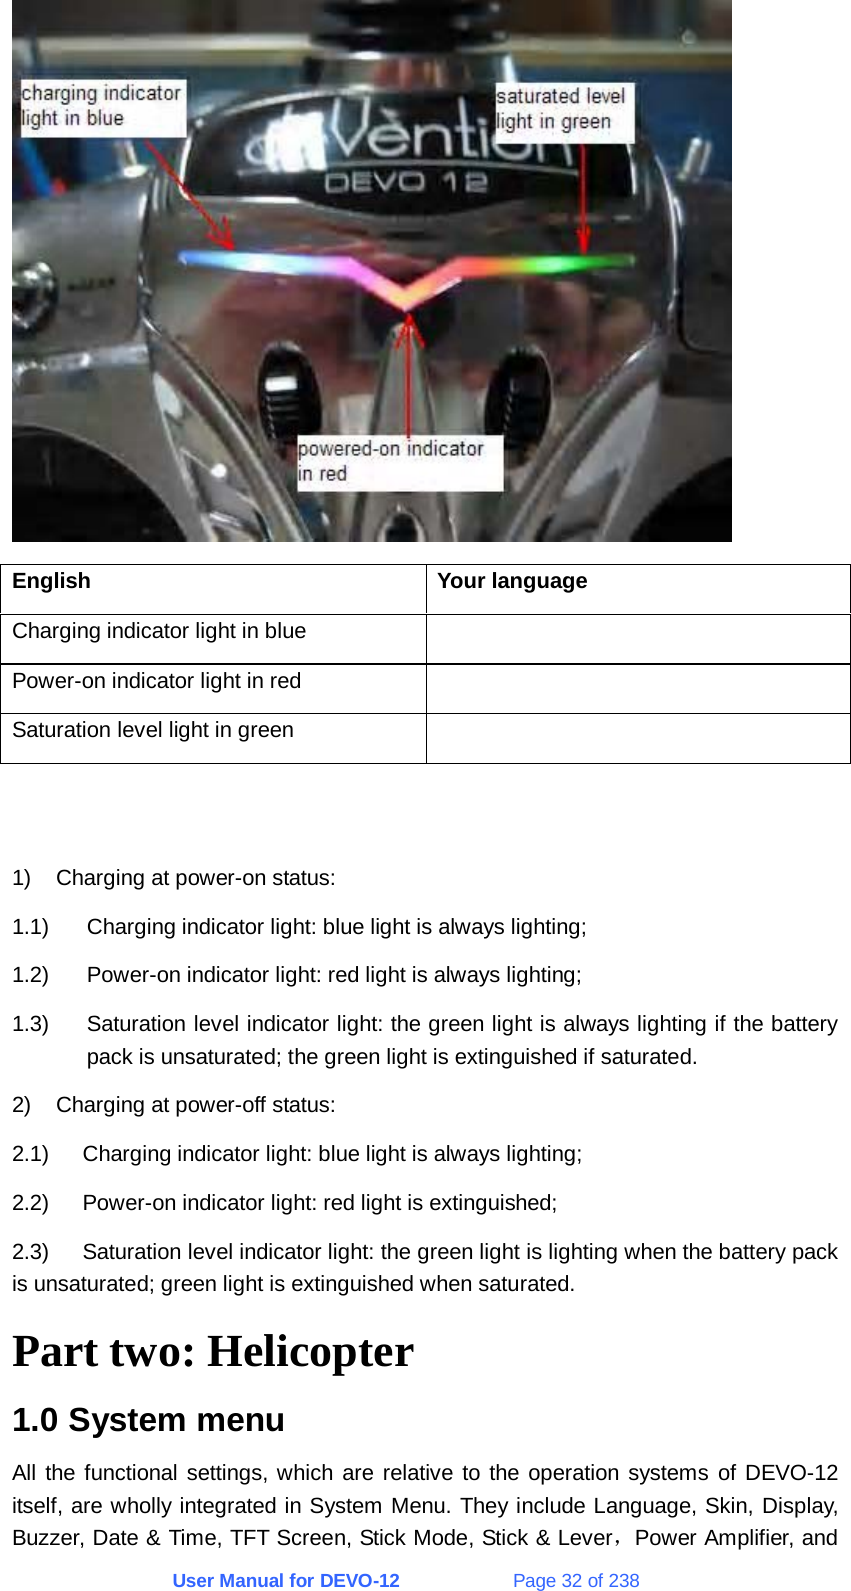 User Manual for DEVO-12             Page 32 of 238  English Your language Charging indicator light in blue   Power-on indicator light in red   Saturation level light in green     1)  Charging at power-on status: 1.1)  Charging indicator light: blue light is always lighting; 1.2)  Power-on indicator light: red light is always lighting; 1.3)  Saturation level indicator light: the green light is always lighting if the battery pack is unsaturated; the green light is extinguished if saturated. 2)  Charging at power-off status: 2.1)      Charging indicator light: blue light is always lighting; 2.2)      Power-on indicator light: red light is extinguished; 2.3)      Saturation level indicator light: the green light is lighting when the battery pack is unsaturated; green light is extinguished when saturated. Part two: Helicopter 1.0 System menu All the functional settings, which are relative to the operation systems of DEVO-12 itself, are wholly integrated in System Menu. They include Language, Skin, Display, Buzzer, Date &amp; Time, TFT Screen, Stick Mode, Stick &amp; Lever，Power Amplifier, and 